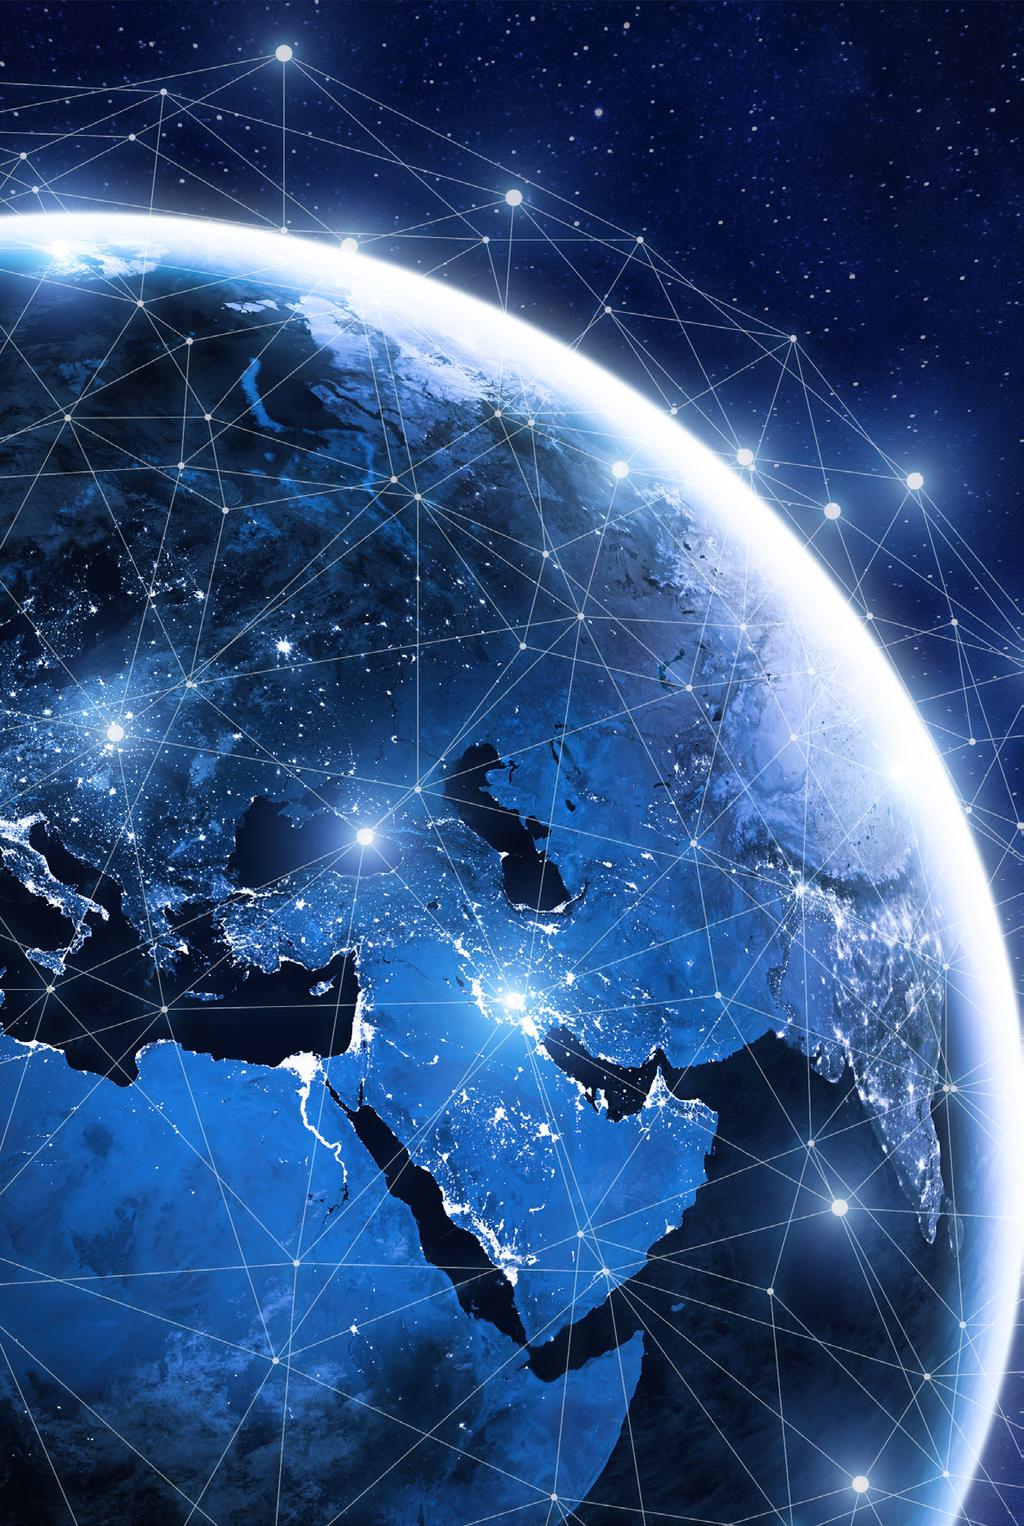 The Internet of Everything: Building Cyber Resilience in a Connected World The Internet of Things (IoT) is everywhere, ushering in a technological revolution at lightning speed.